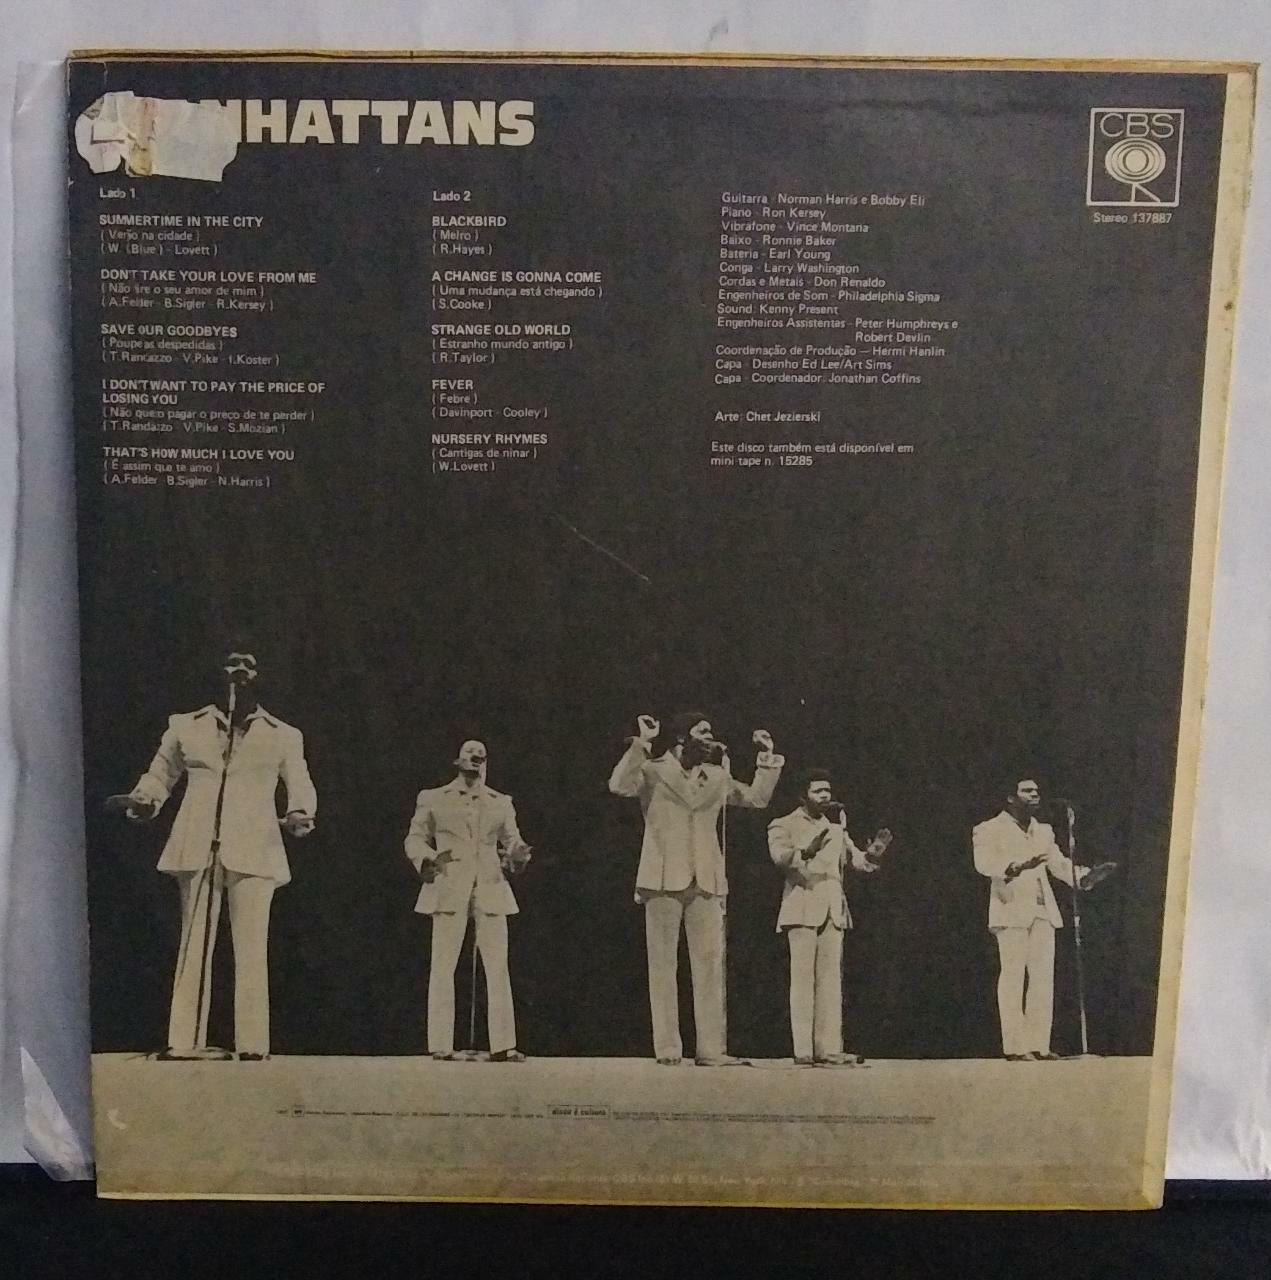 Vinil - Manhattans - Thats how Much i Love You